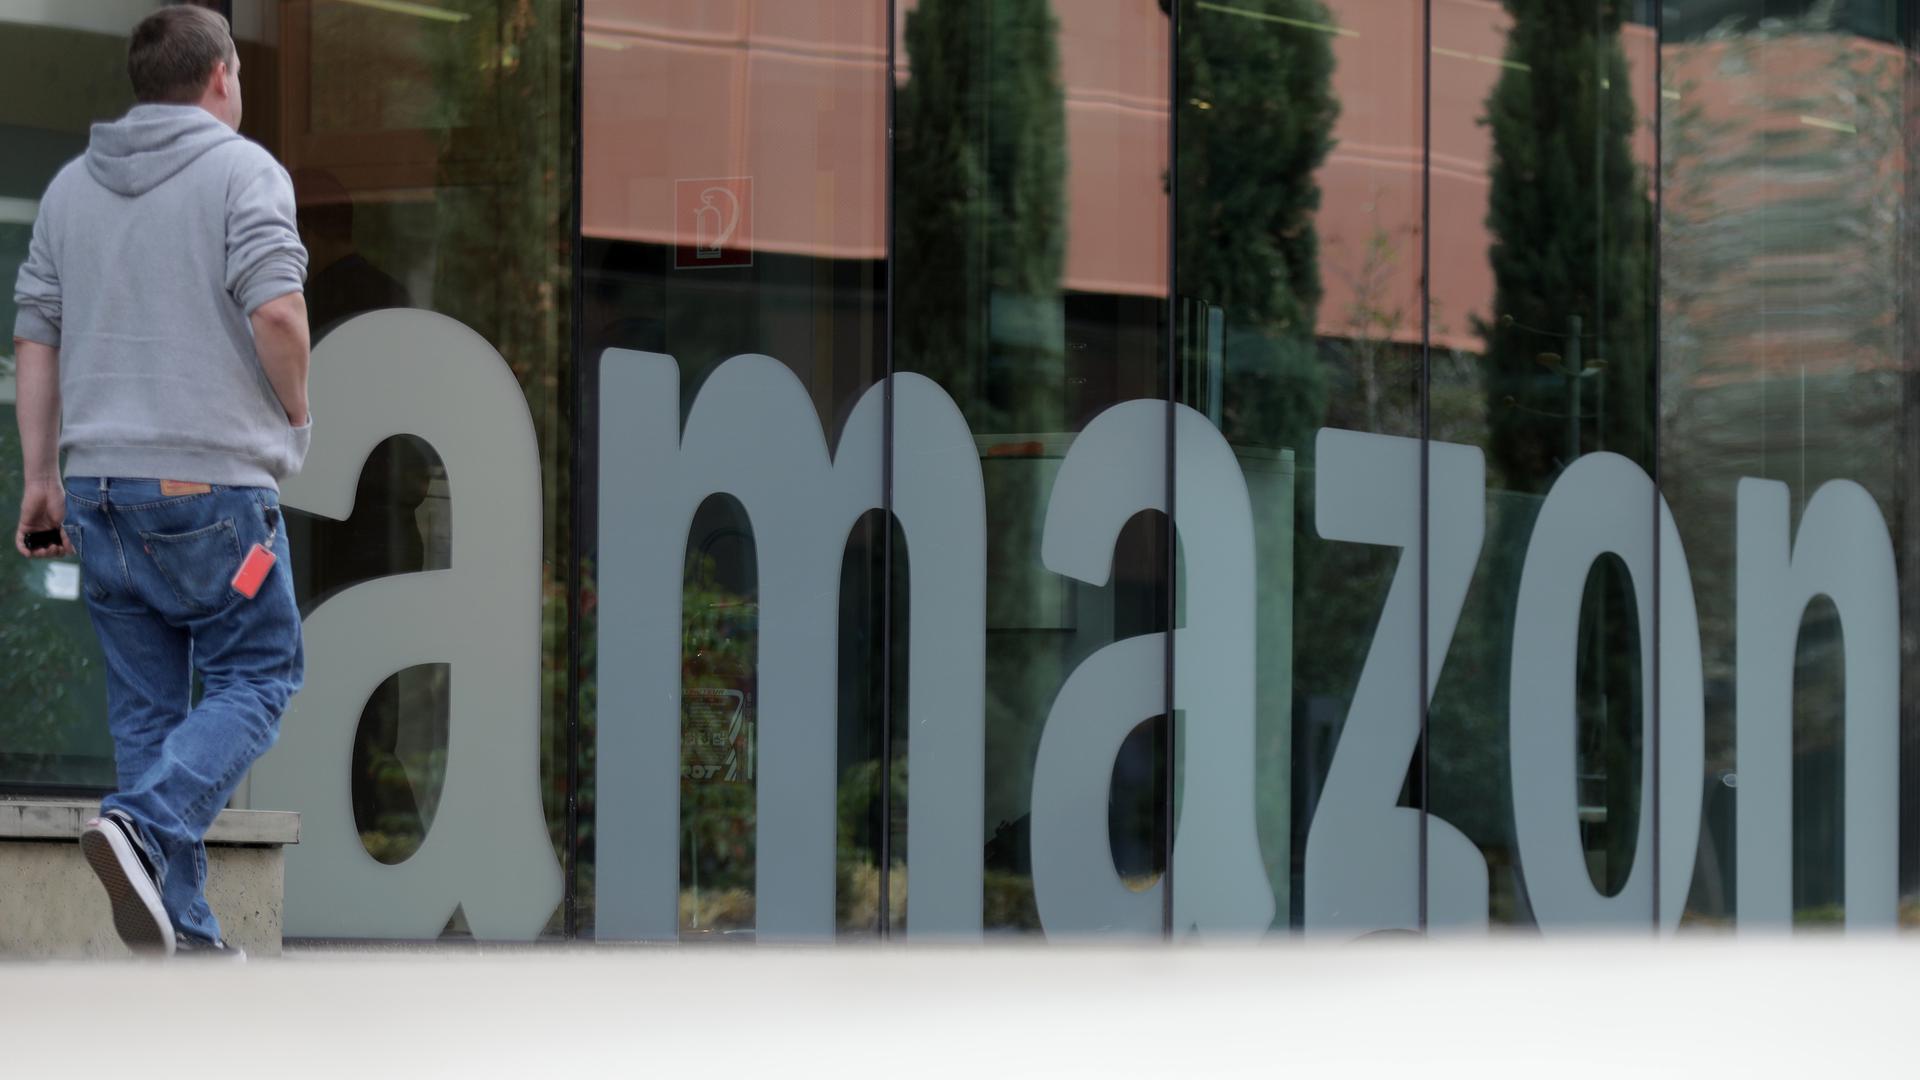 Online retail giant Amazon, which has its EU headquarters in Luxembourg